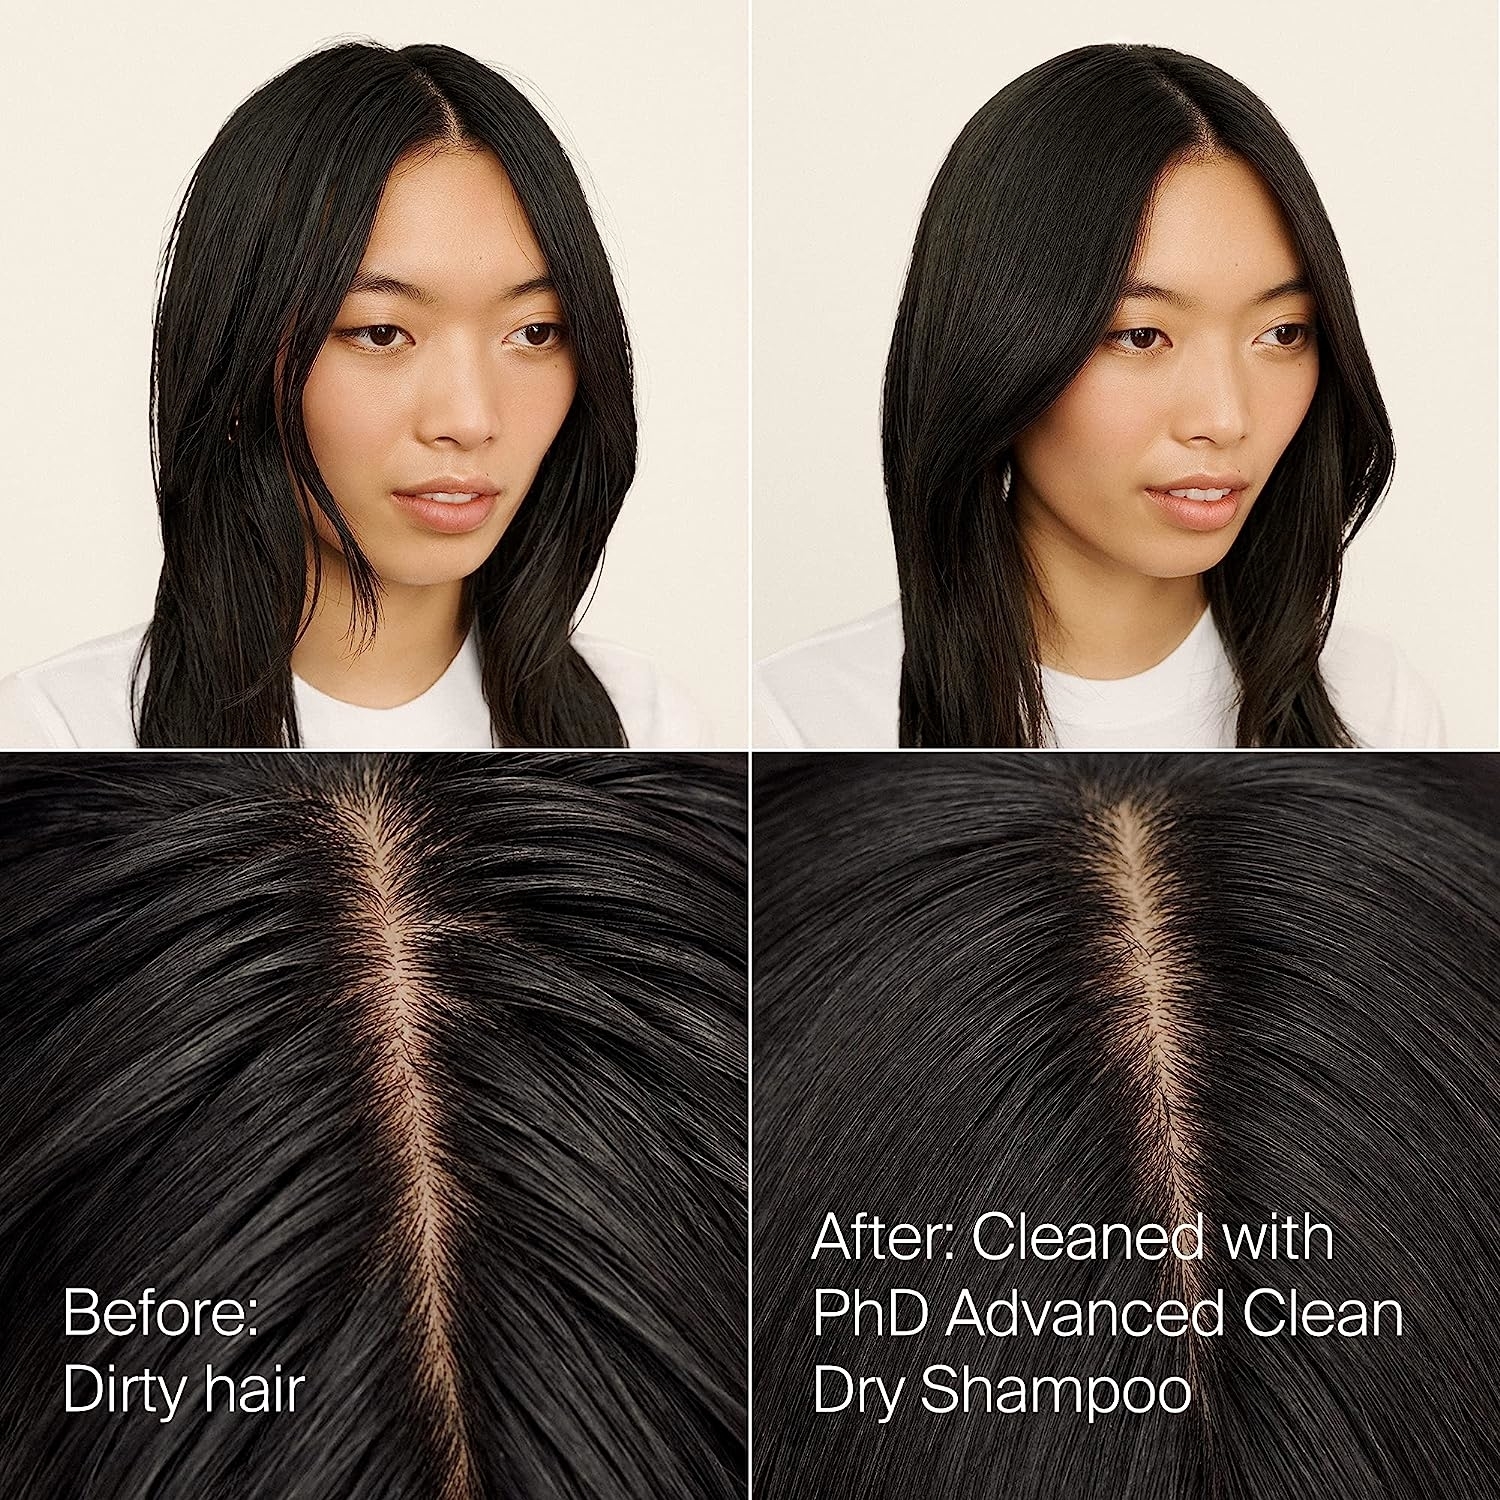 A before/after showing how it makes oily looking hair look cleaner